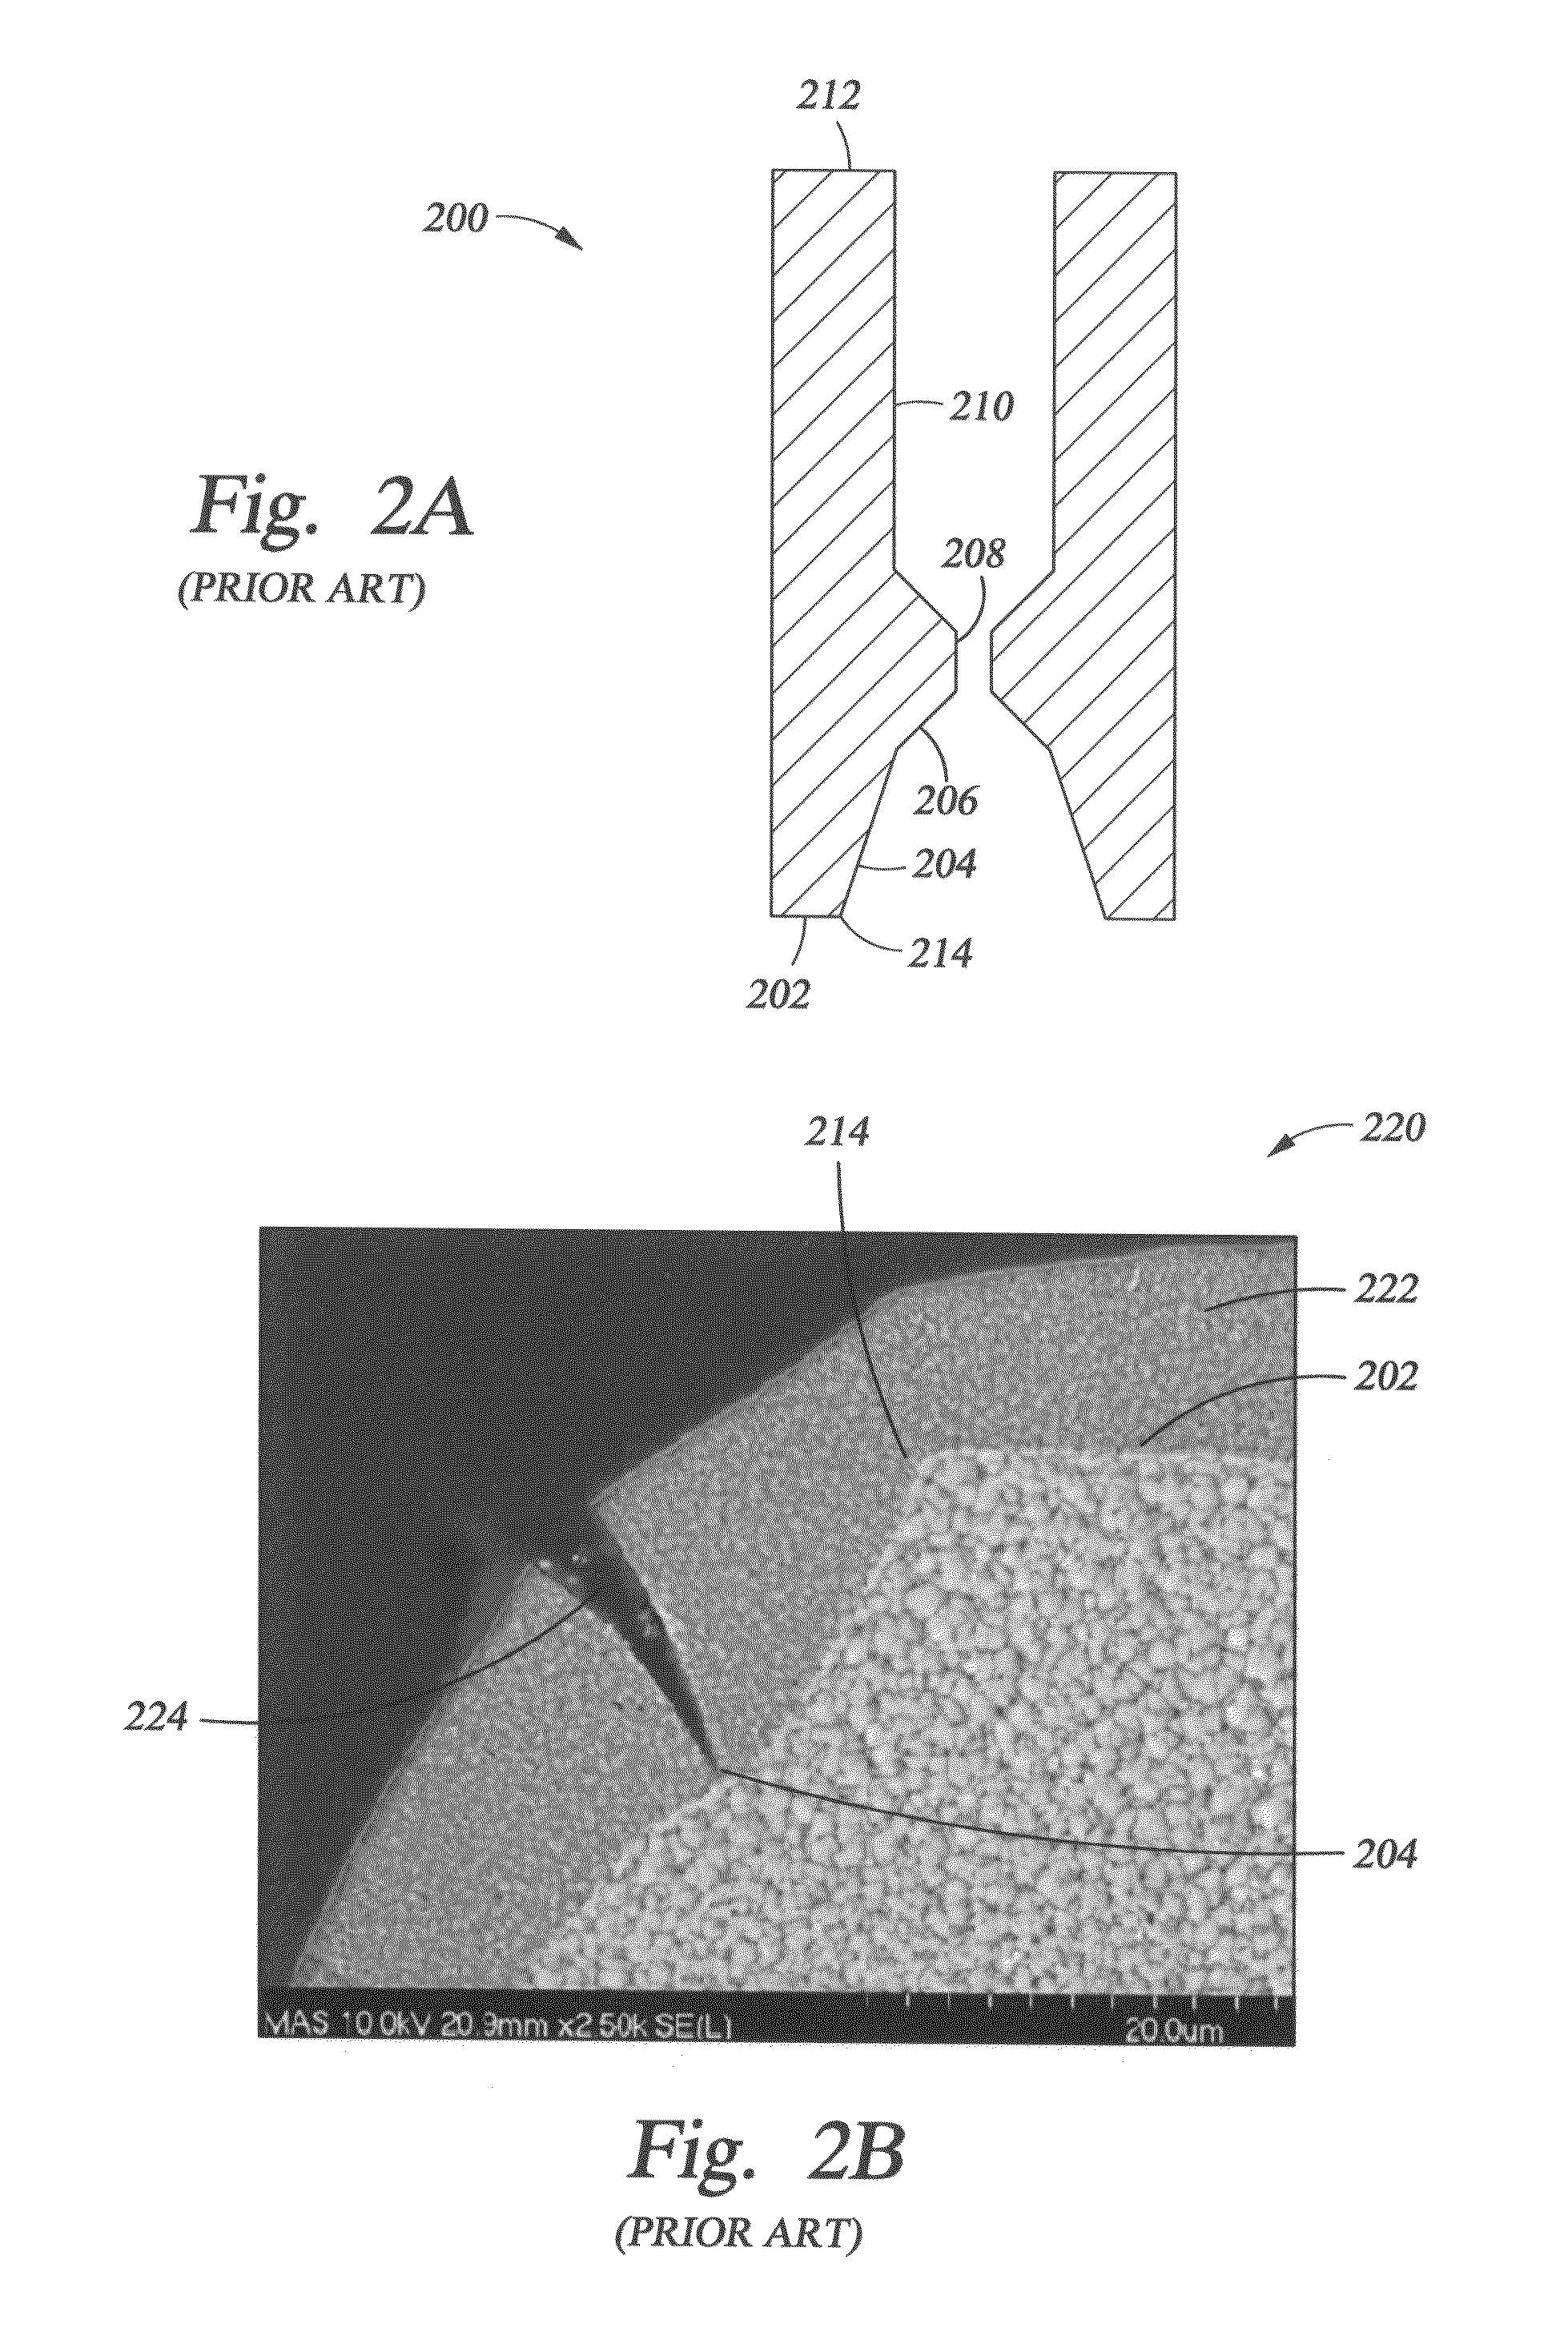 Particle reduction on surfaces of chemical vapor deposition processing apparatus